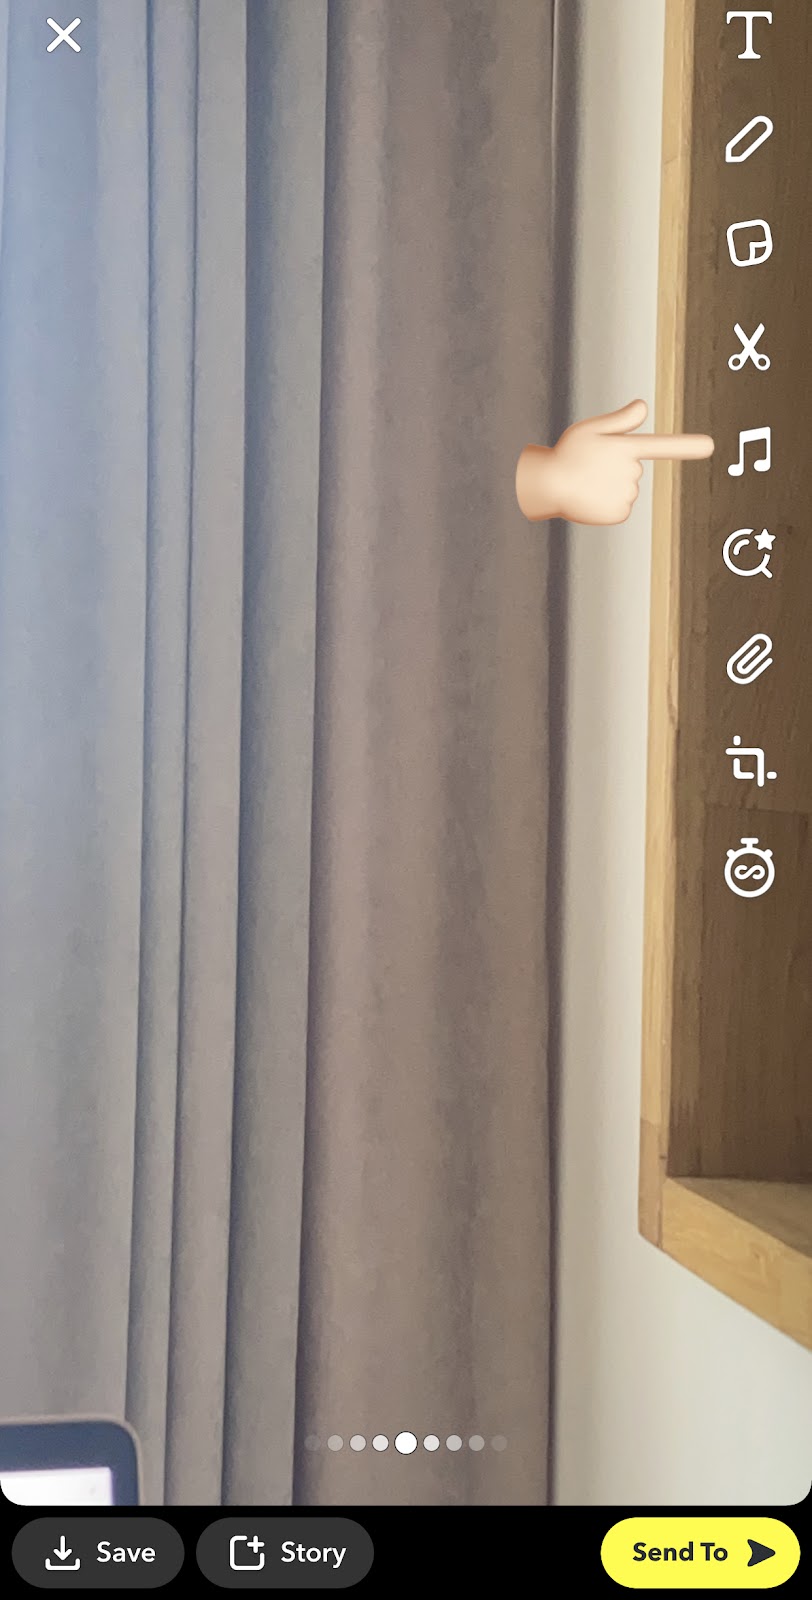 How to Add Music to Snapchat Story